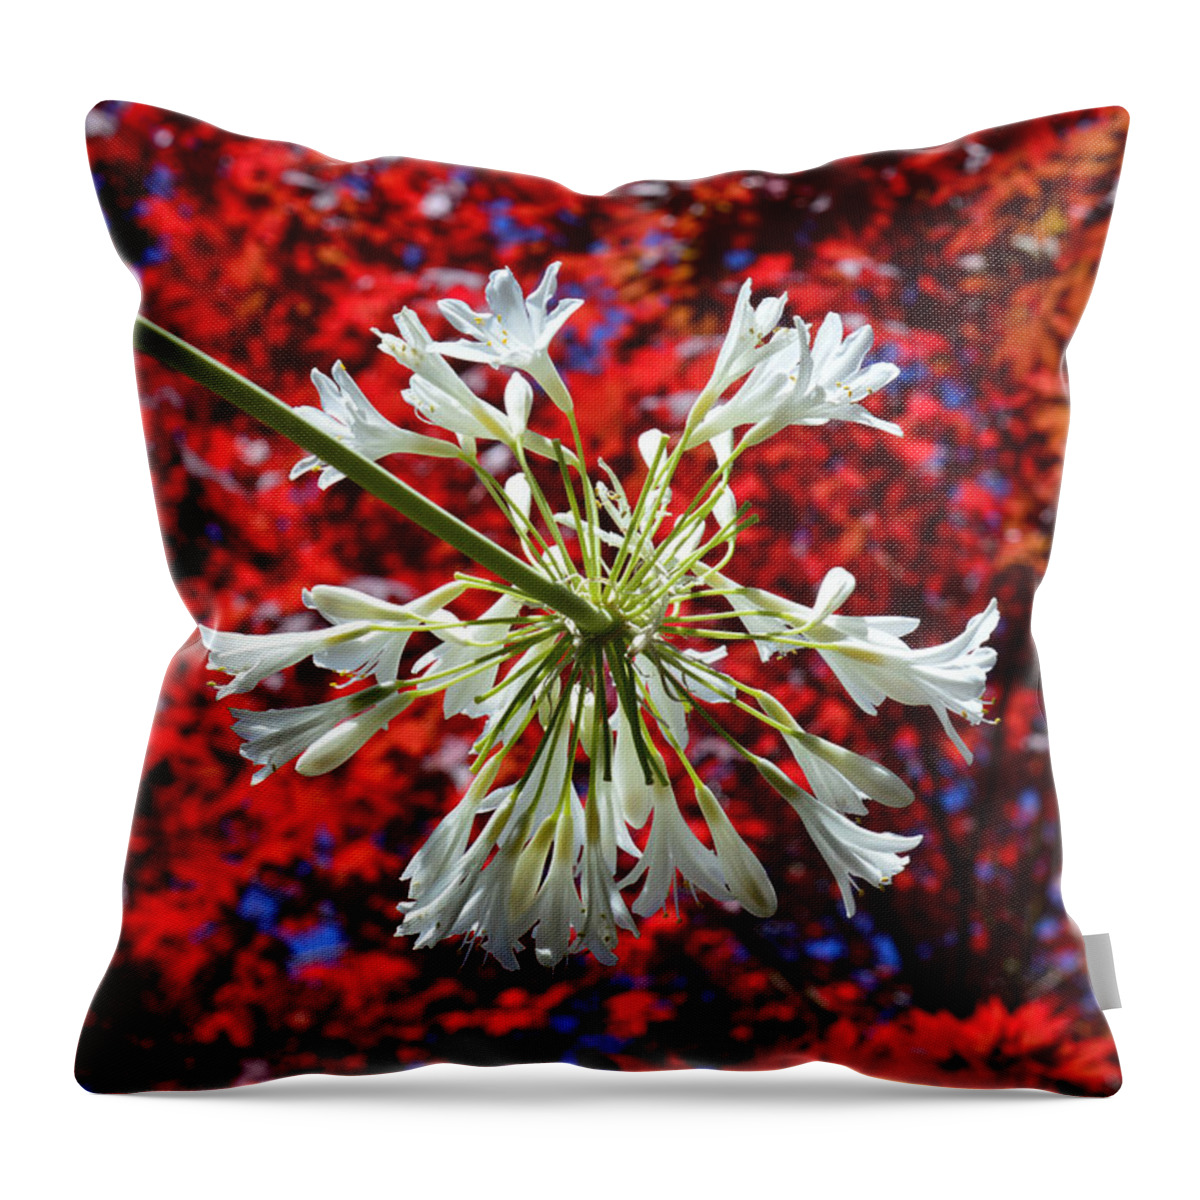 Fireworks Throw Pillow featuring the photograph Bursting In Air by Donna Blackhall